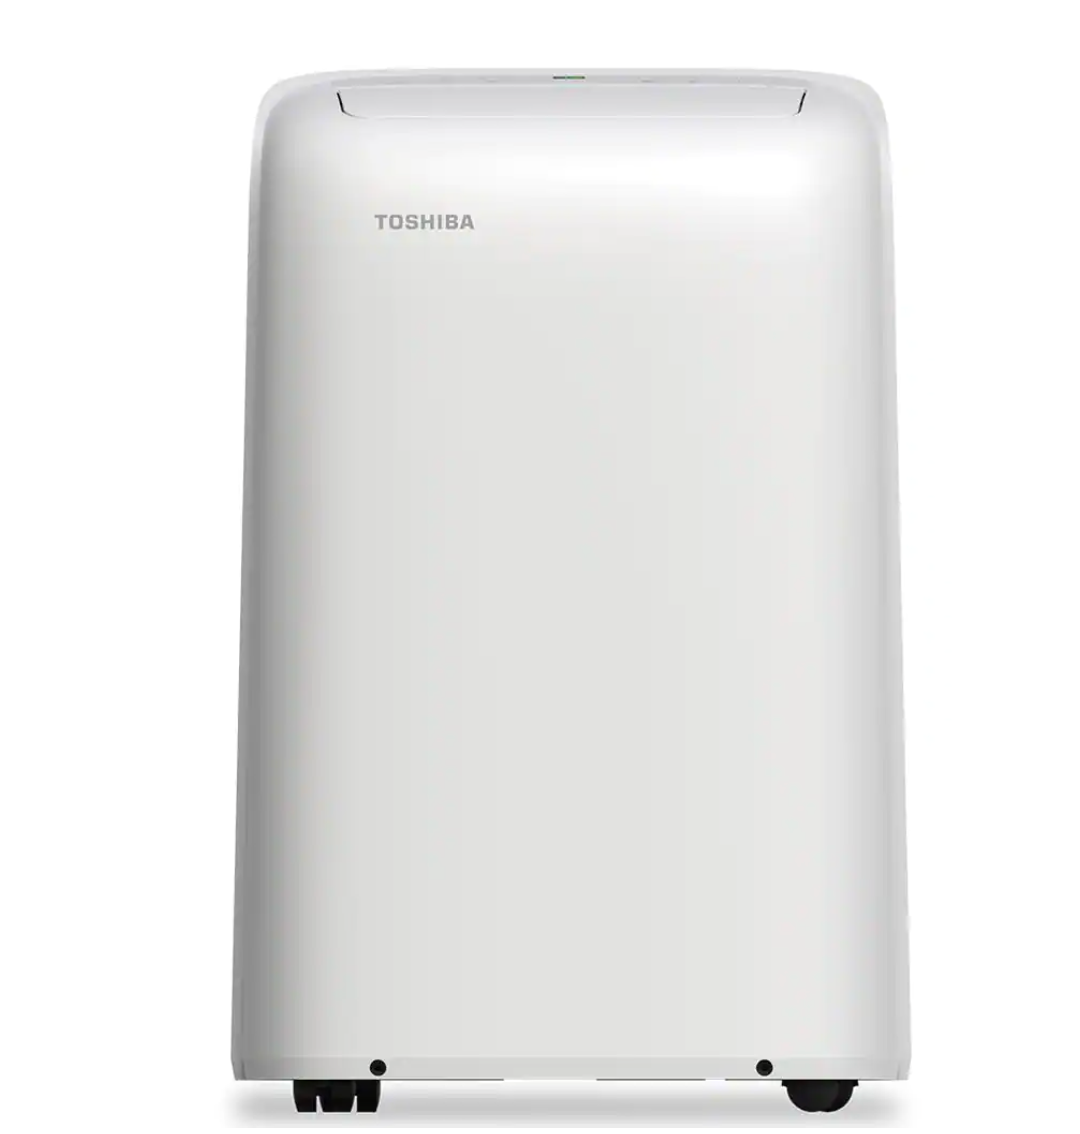 Toshiba 6,000 BTU Portable Air Conditioner Cools 250 Sq. Ft. with Dehumidifier and Remote Control in White